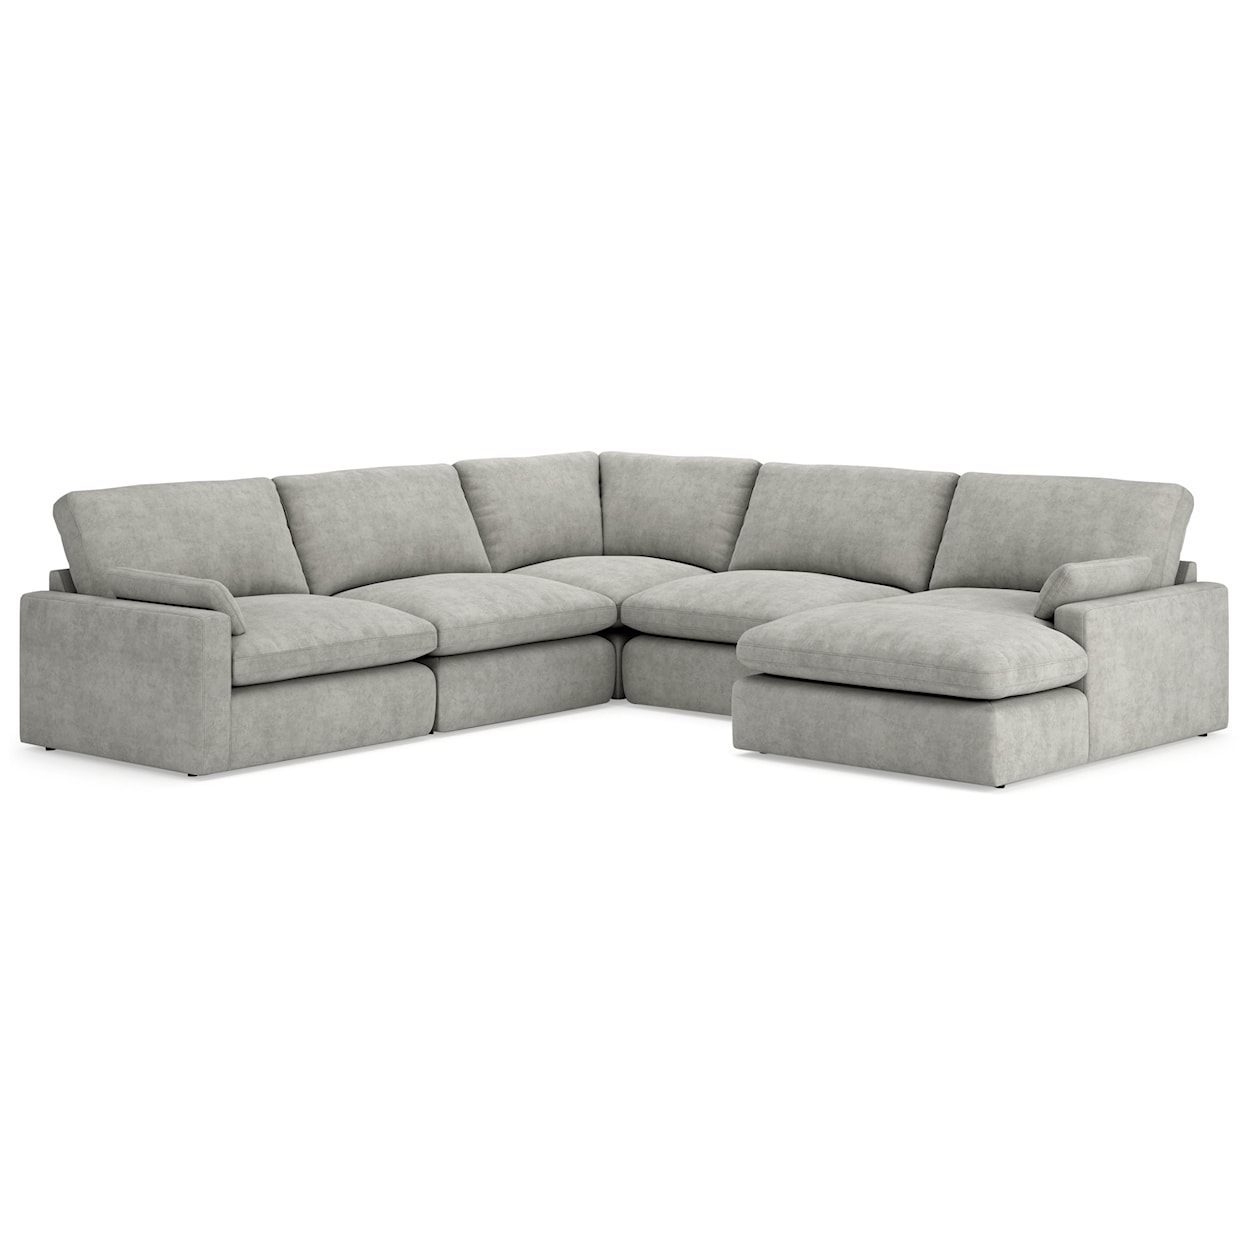 Signature Design by Ashley Furniture Sophie 5-Piece Sectional with Chaise